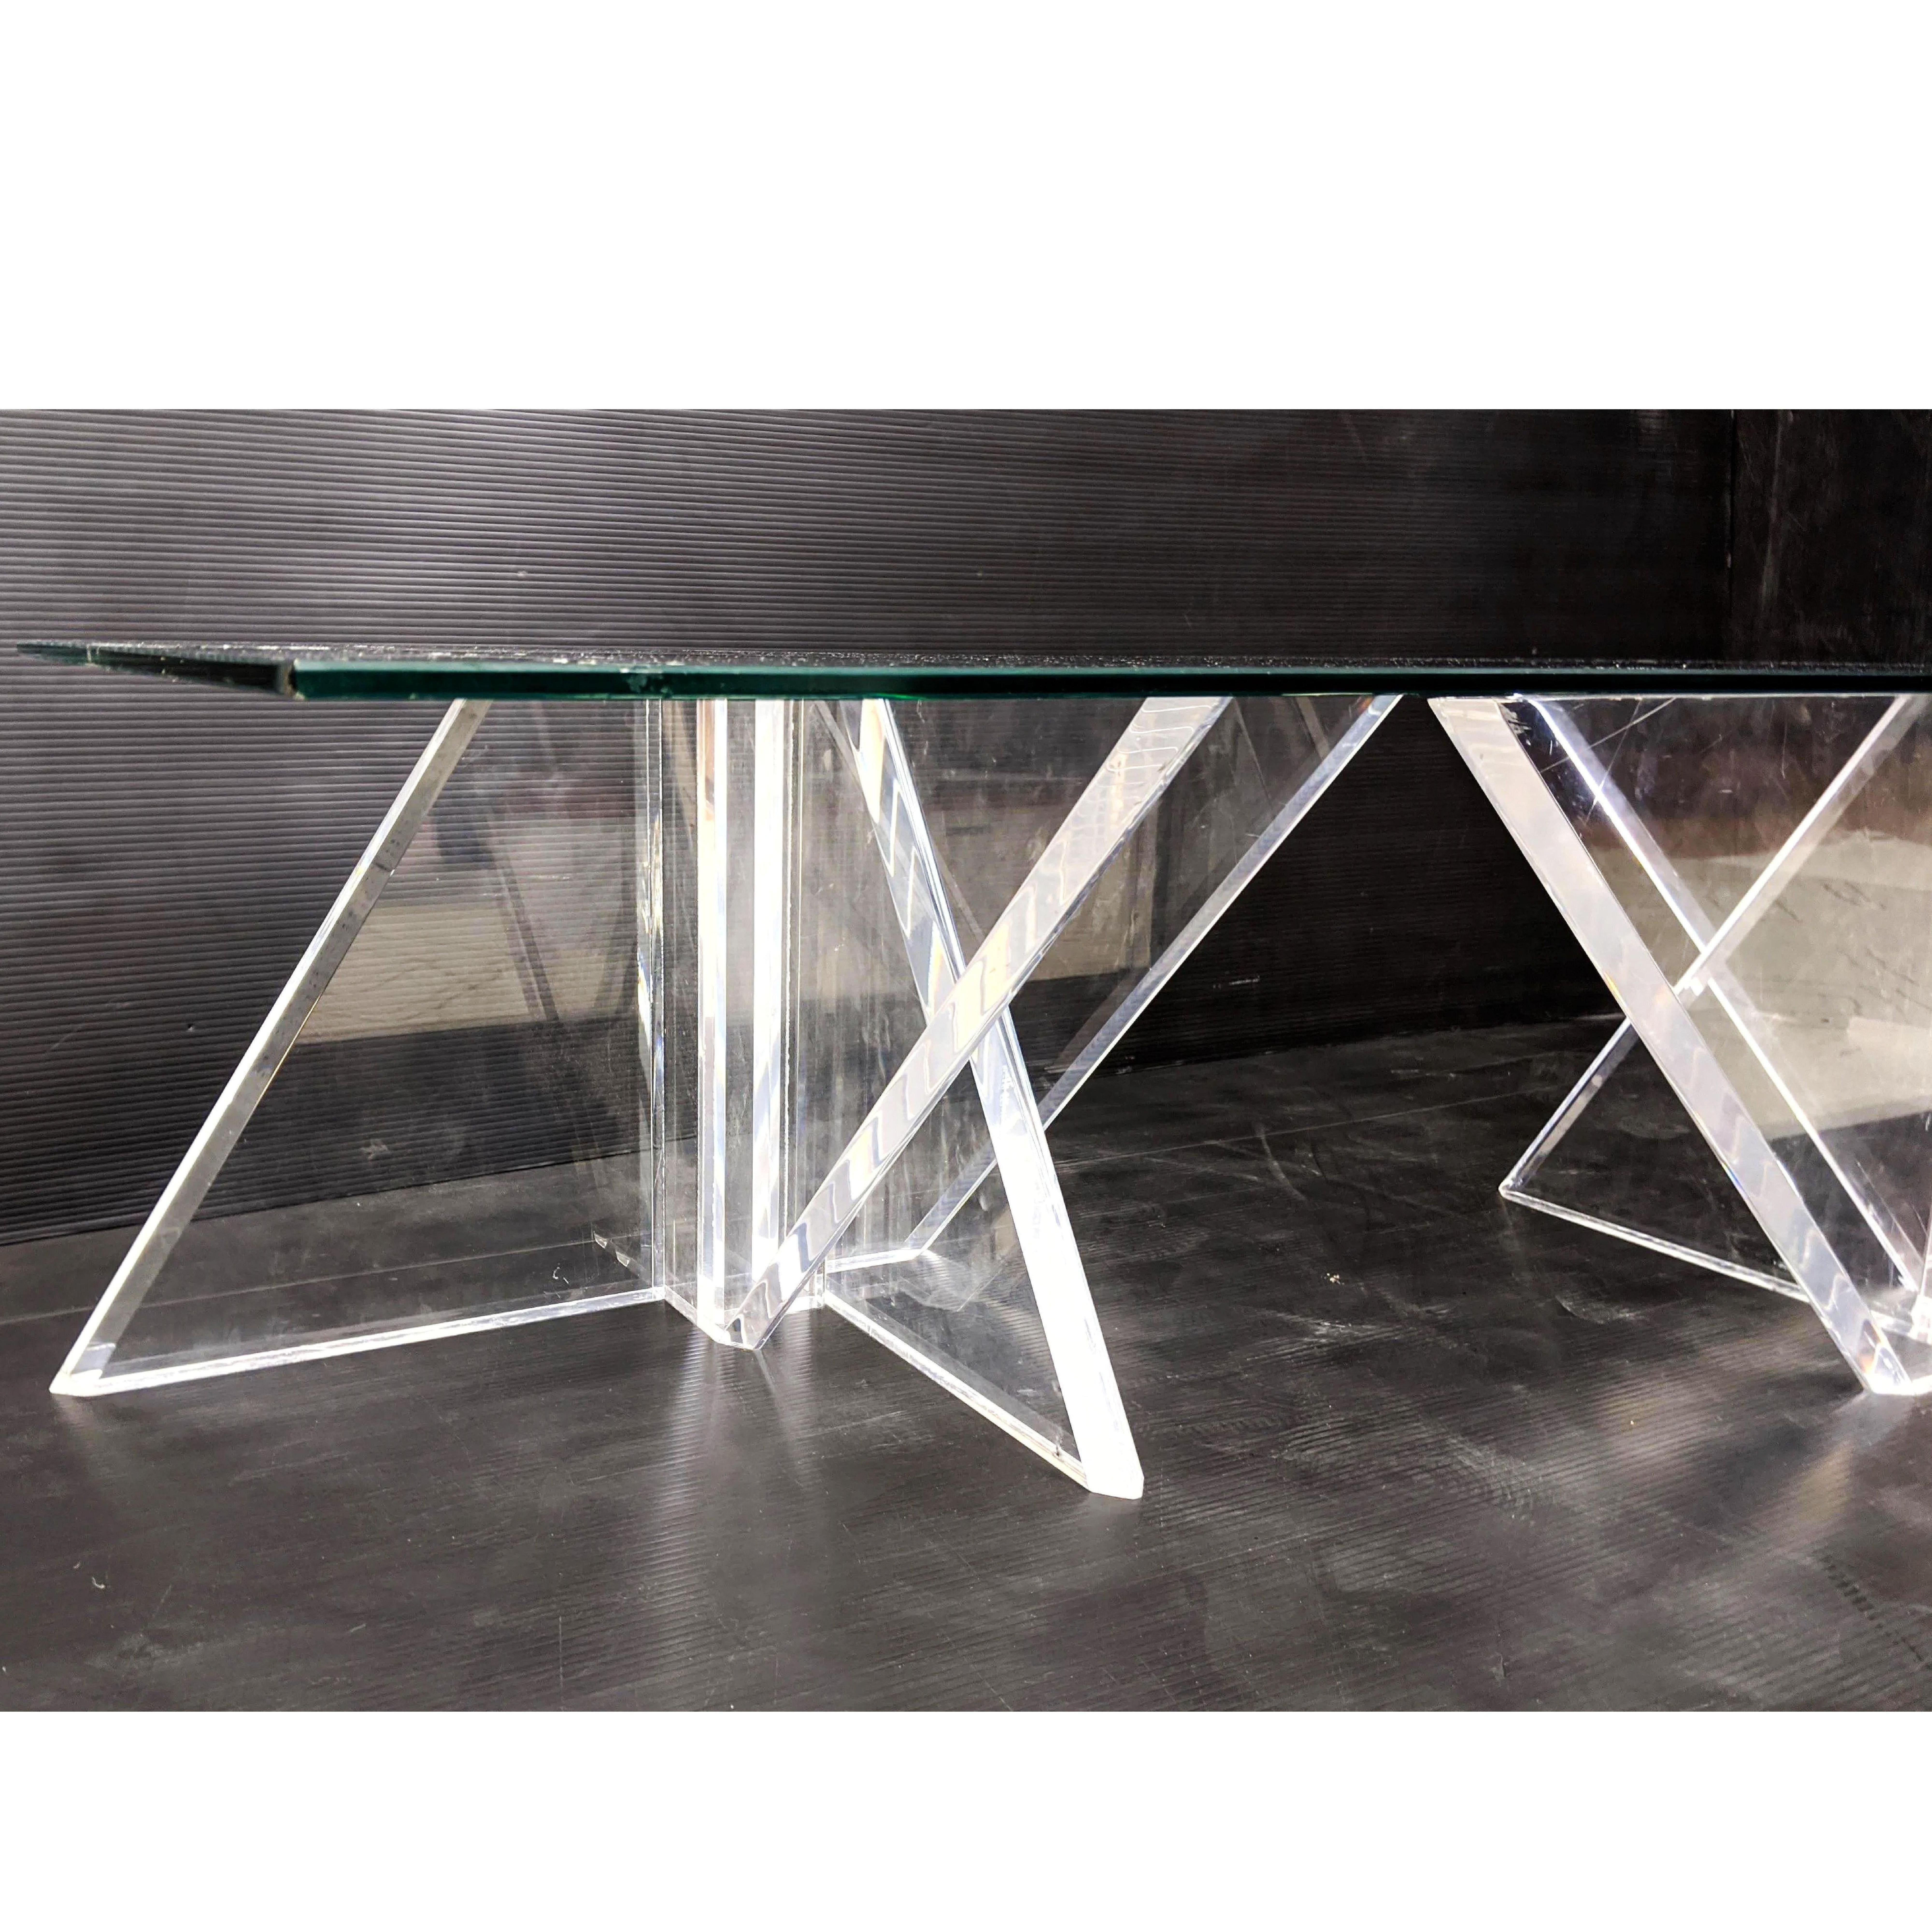 Minimal prismatic, substantial Lucite glass coffee table, 1970s sculptural modern cocktail and coffee table. Attributed to Les Prismatiques. Gorgeous minimal Mid-Century Modern piece. I would suggest a larger, thilcker glass replacement top, as the